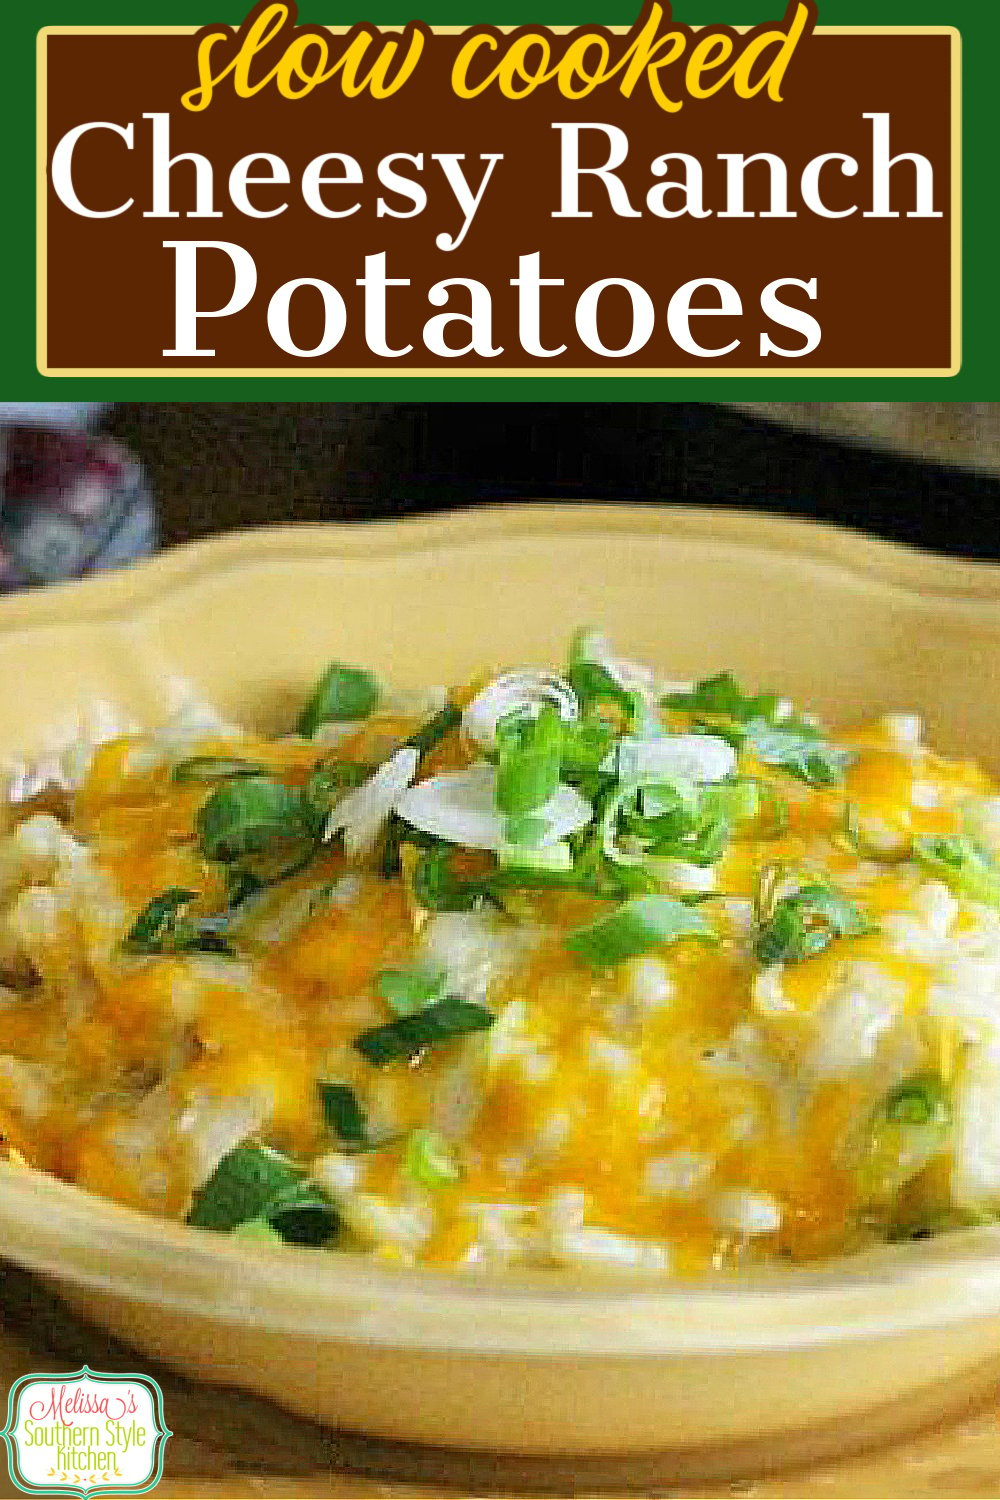 Skip the oven and simmer these gooey ranch potatoes in your slow cooker #ranchpotatoes #slowcookercheesyranchpotatoes #potatocasserole #slowcookerrecipes #crockpotpotatoes #potatocasserole #ranchdressing #sidedishrecipes #dinner #dinnerrecipes #southernfood #southernrecipes via @melissasssk